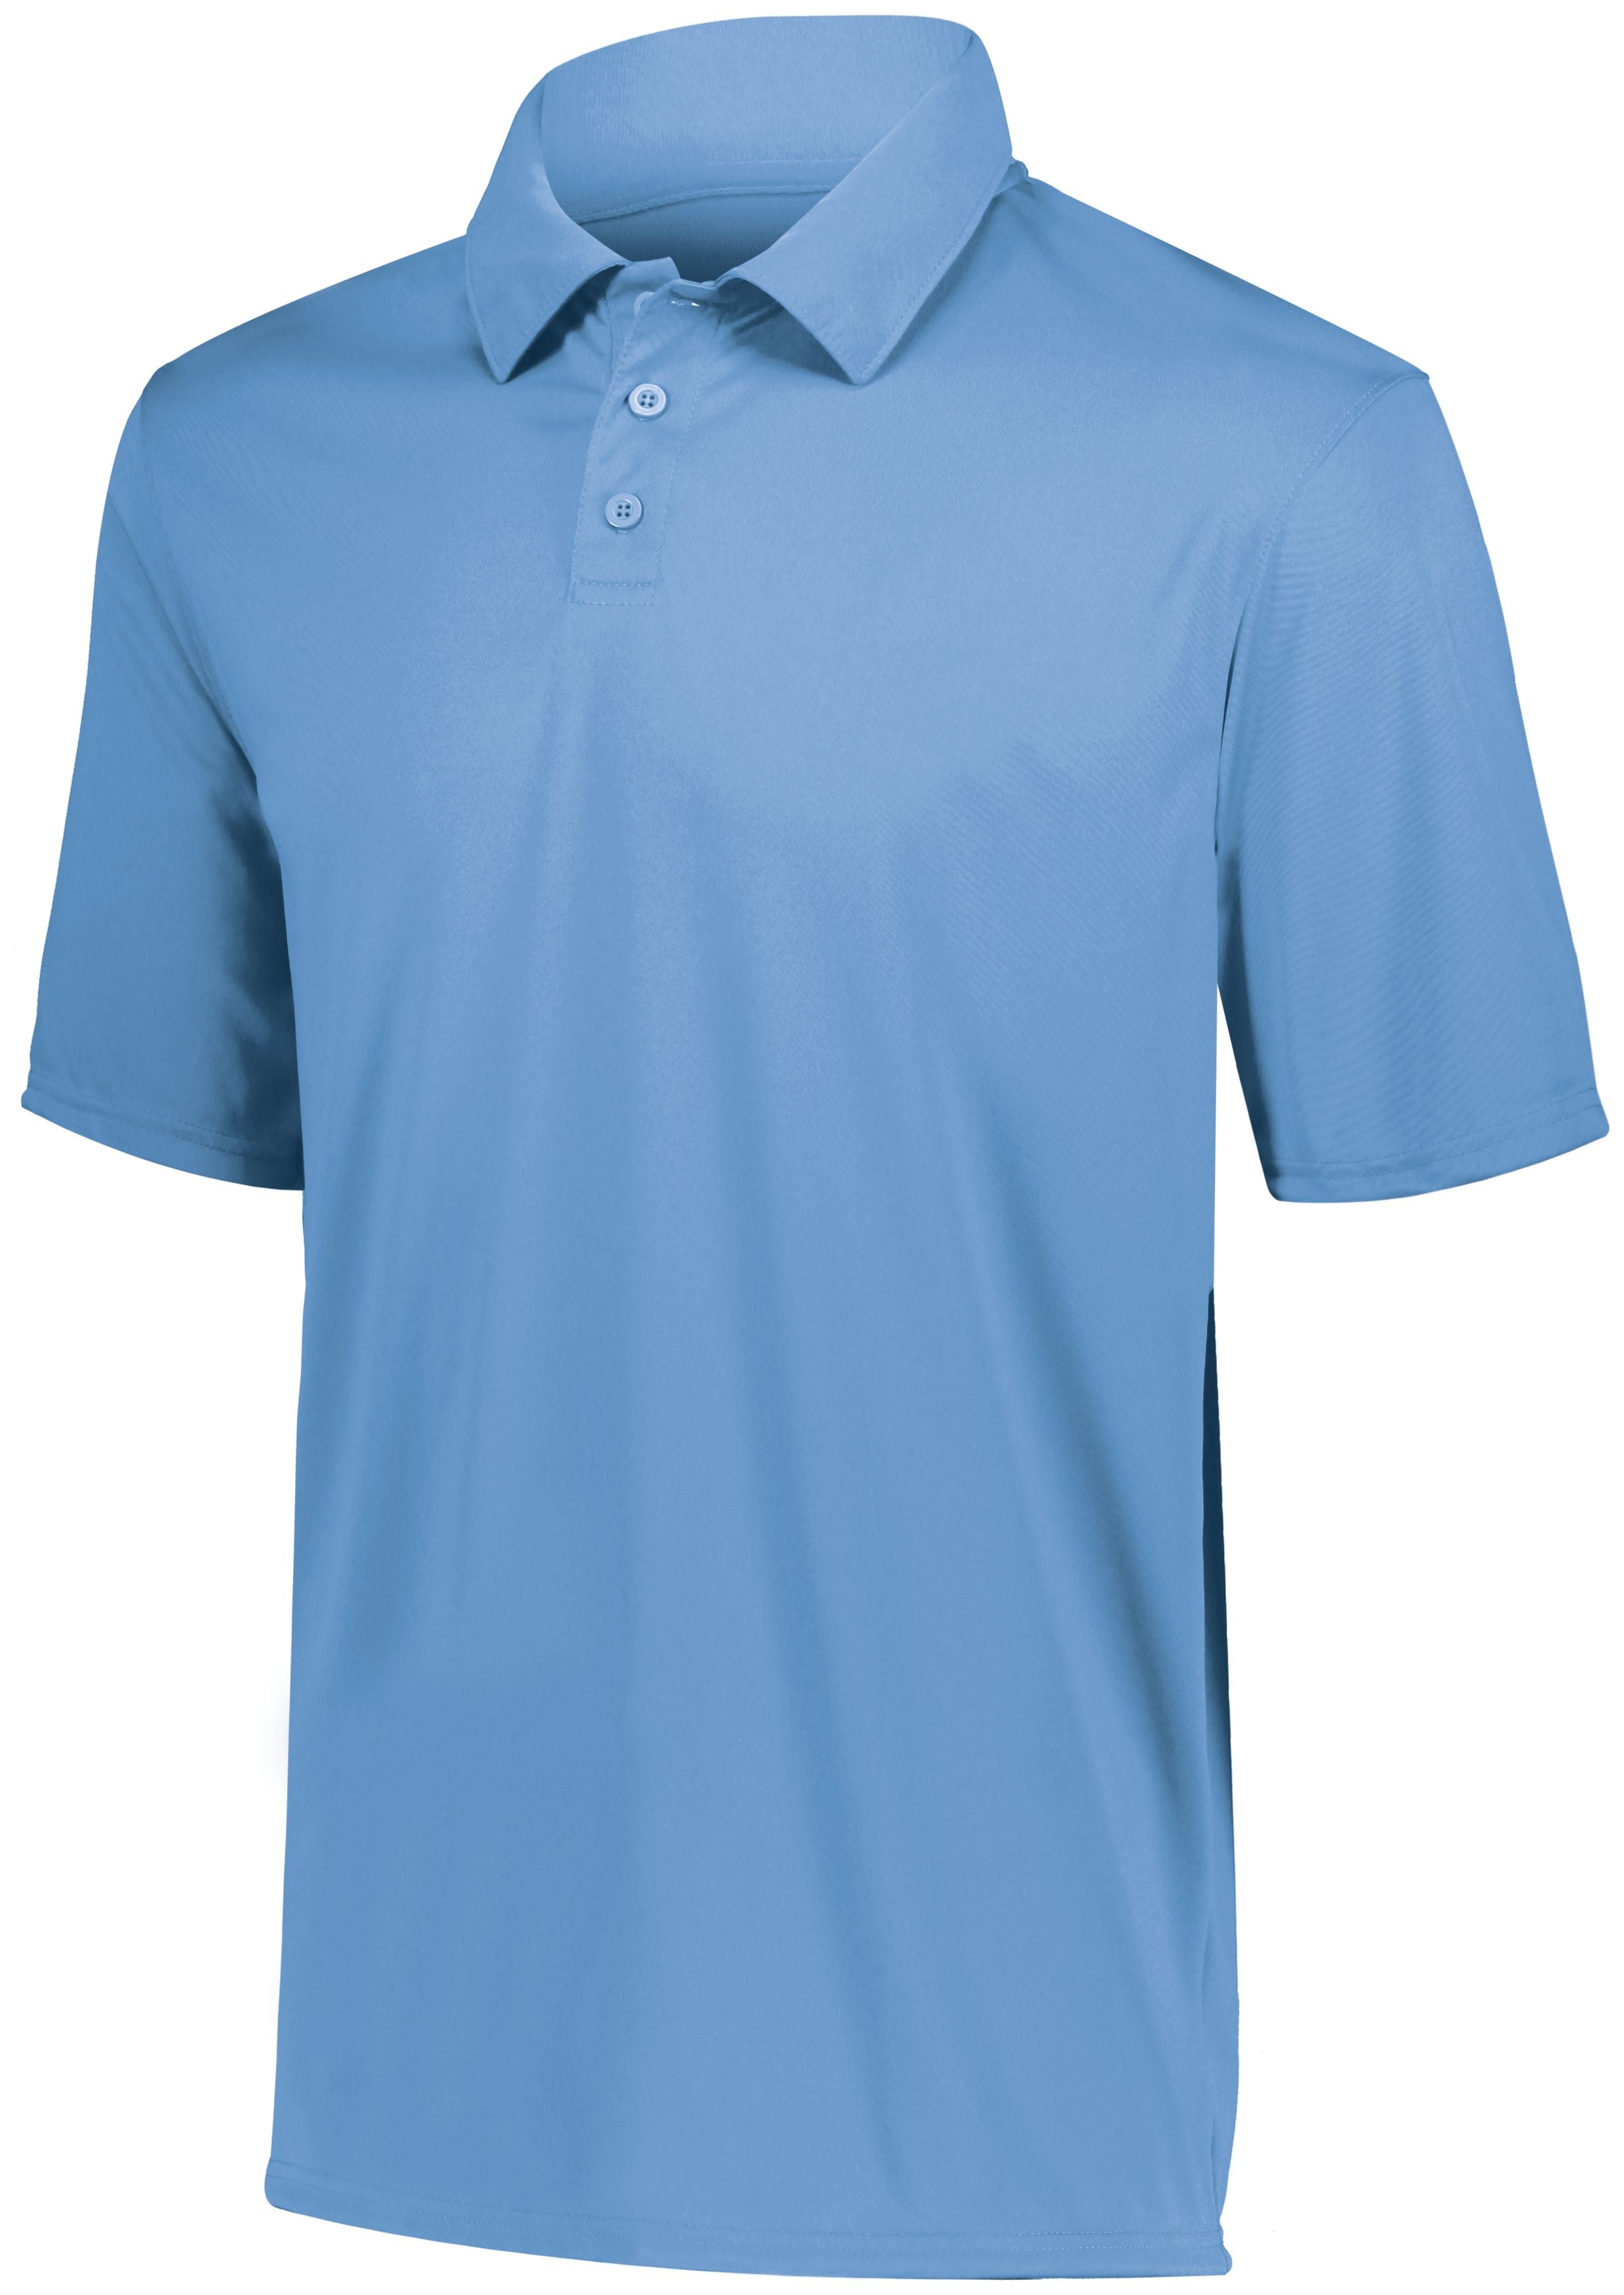 Augusta Sportswear Vital Polo in Columbia Blue  -Part of the Adult, Adult-Polos, Polos, Augusta-Products, Shirts product lines at KanaleyCreations.com